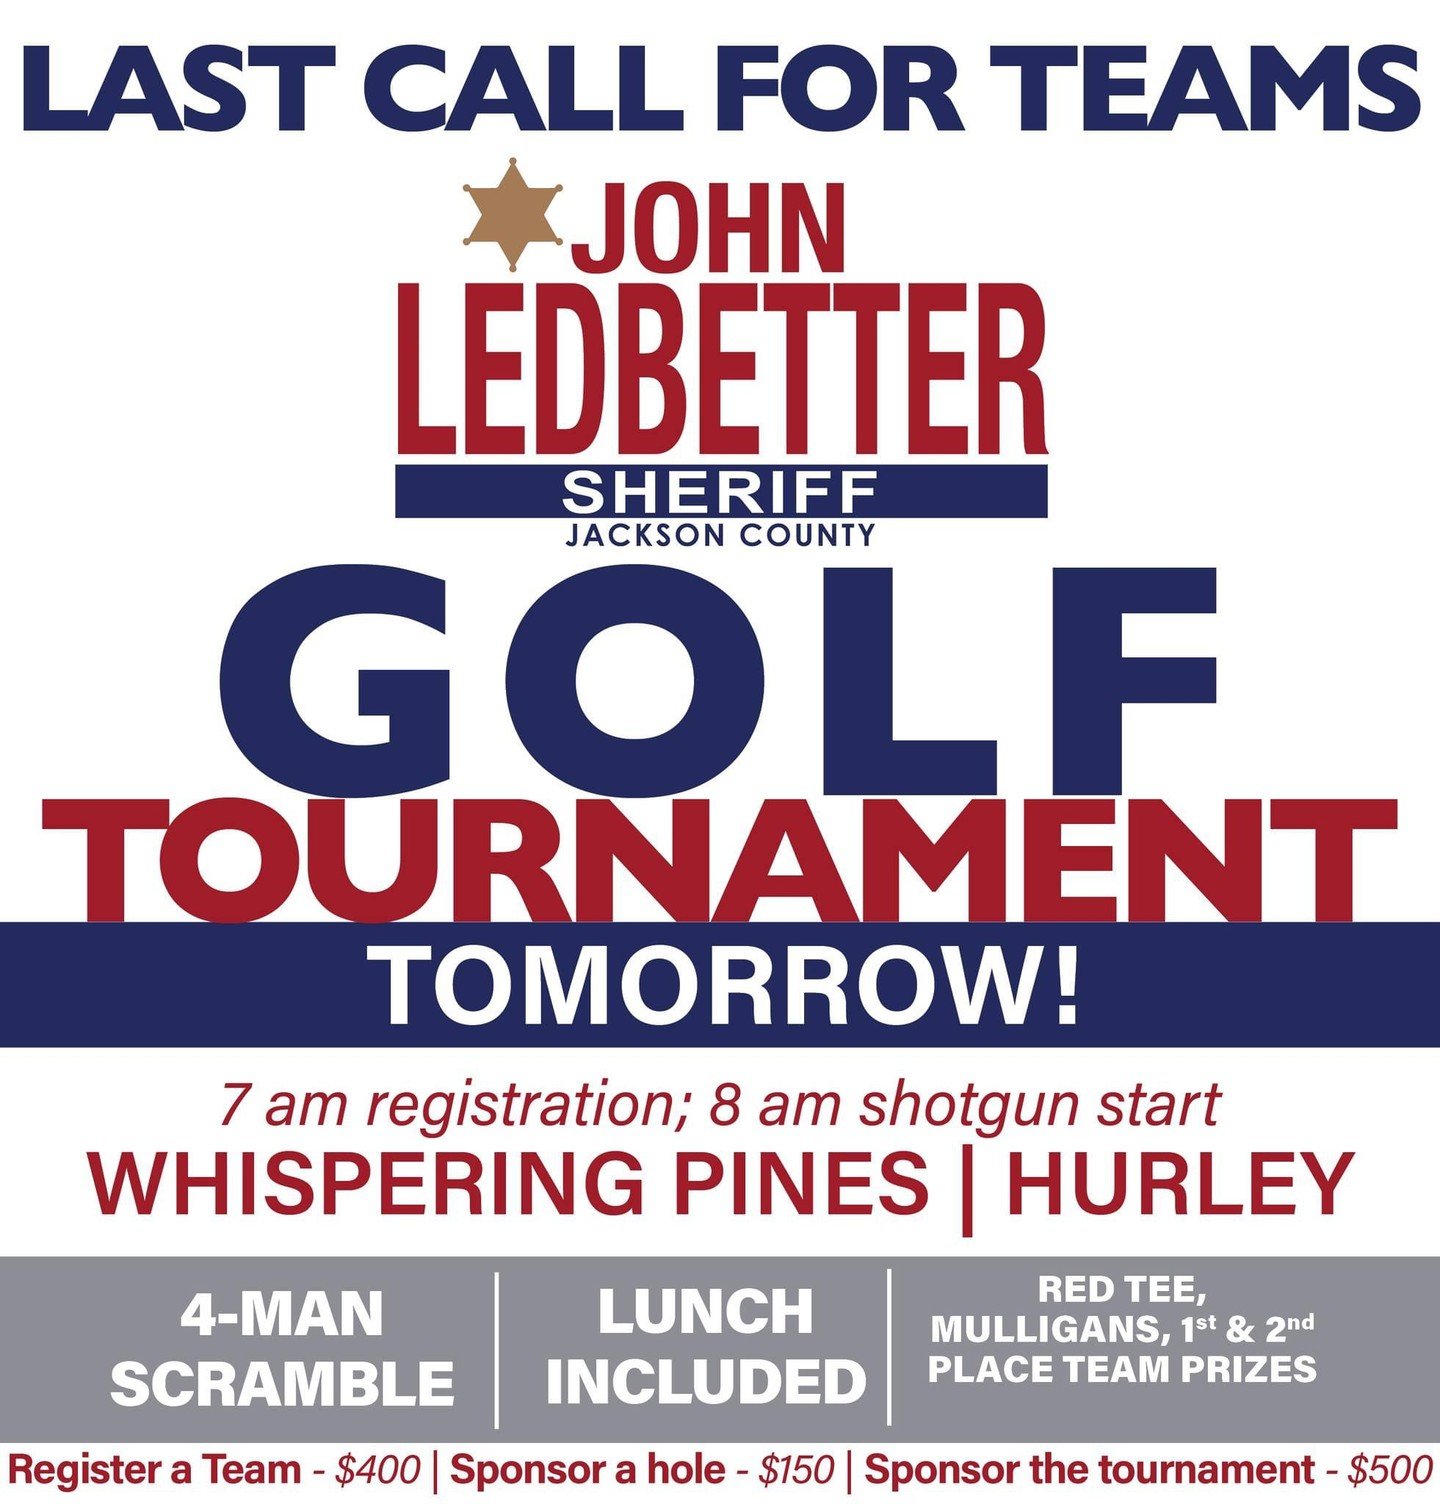 LAST CALL to register your team for the Ledbetter Golf Tournament! It&rsquo;s going to be a beautiful day to hit the fairways tomorrow. We hope to see you there!